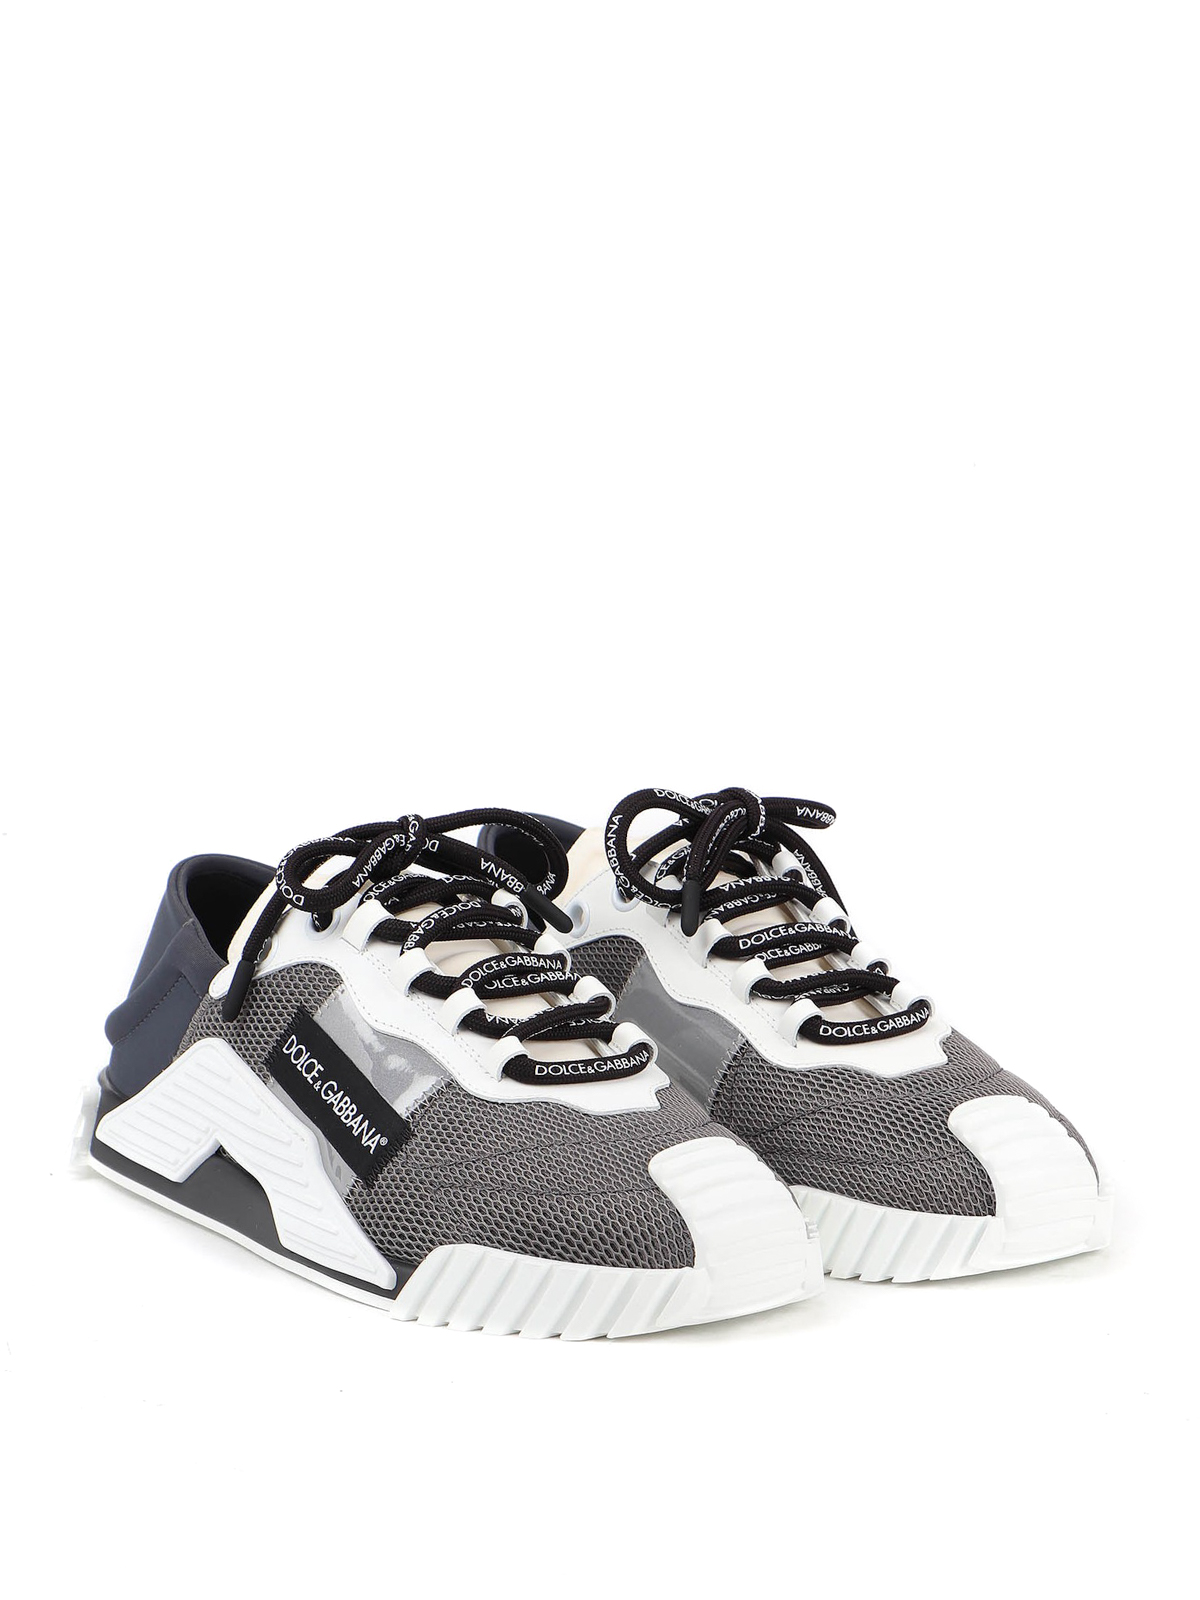 Shop Dolce & Gabbana Ns1 Mixed Materials Black Sneakers In Gris